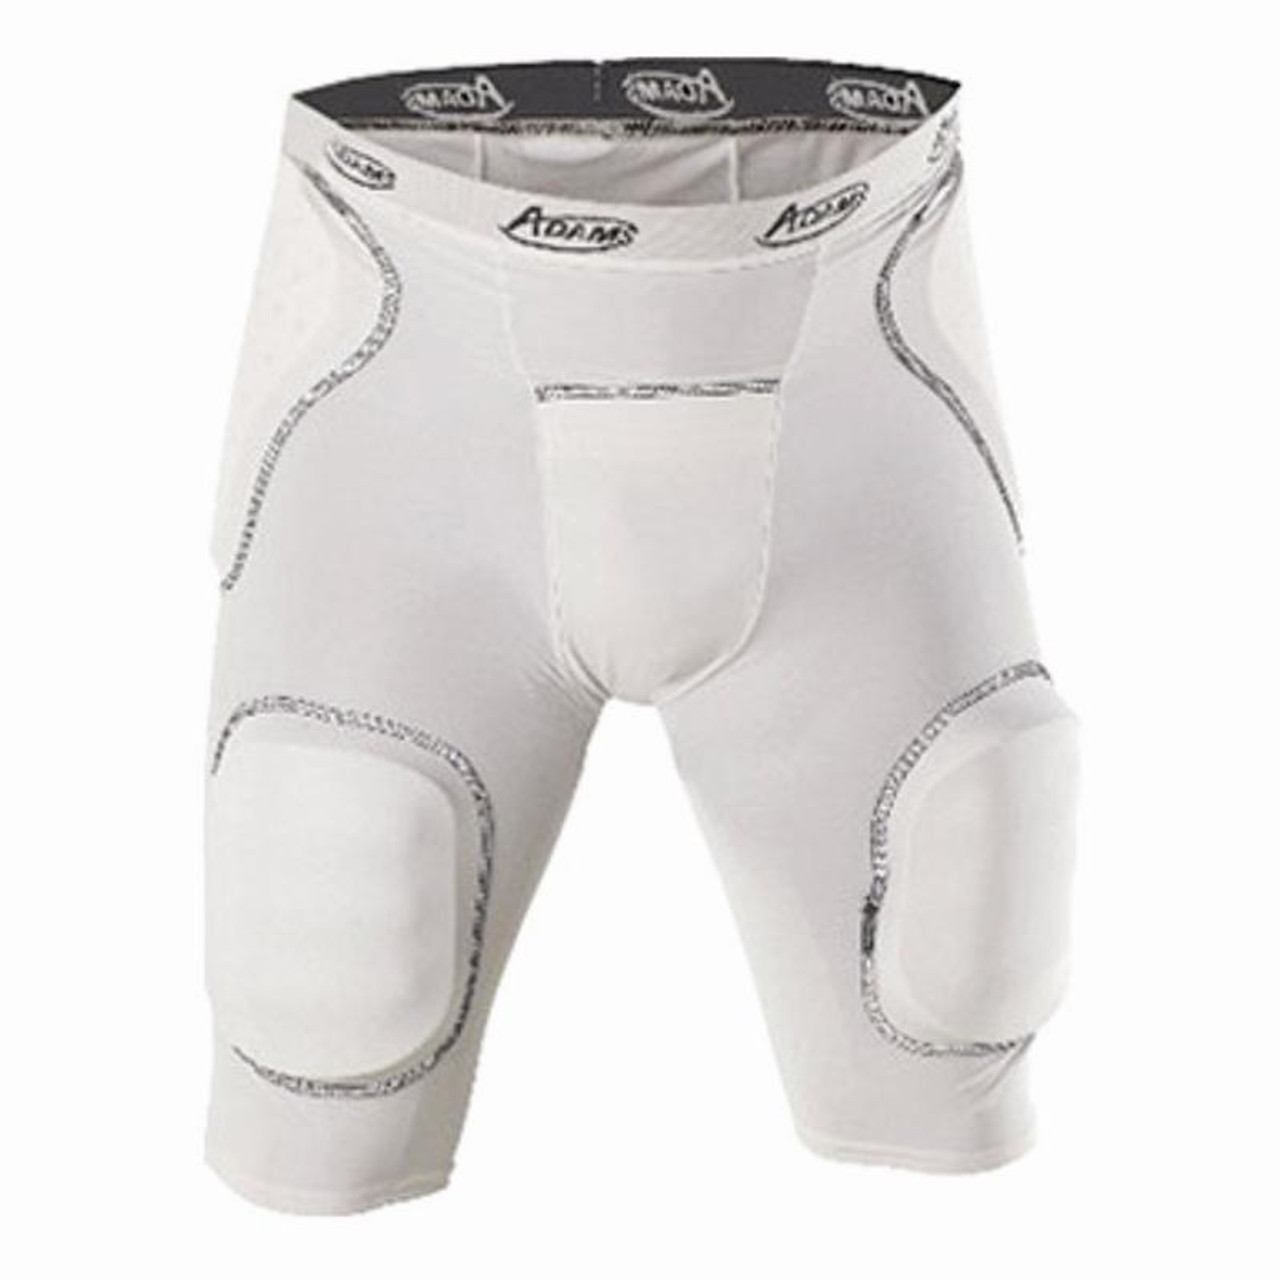  Exxact Sports Rebel 5-Pad Youth Football Girdle For Boys